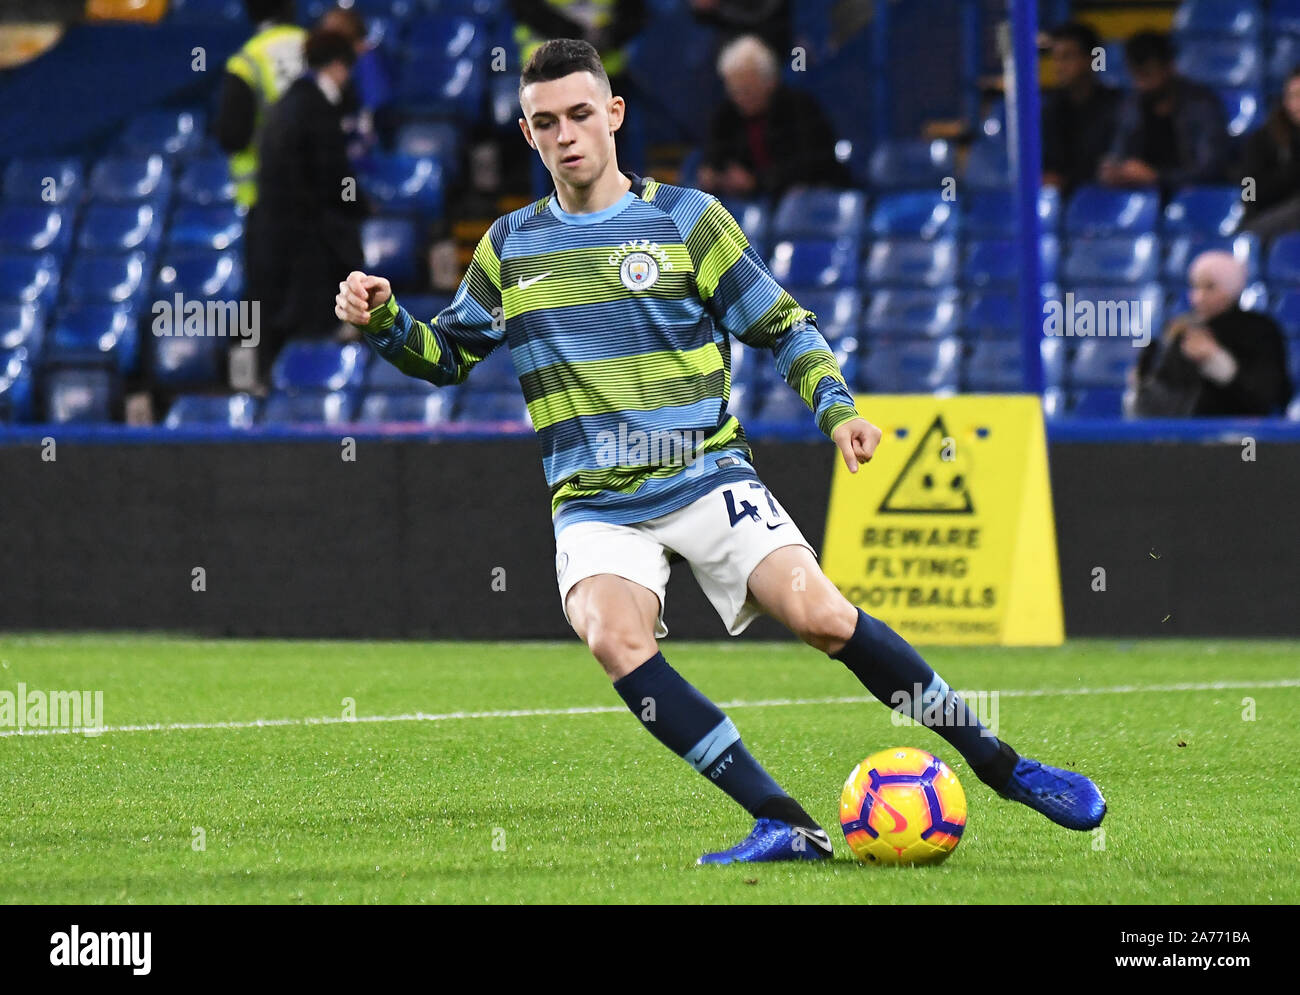 LONDON, ENGLAND - DECEMBER 8, 2018: Phil Foden of City pictured prior to the 2018/19 Premier League game between Chelsea FC and Manchester City at Stamford Bridge. Stock Photo